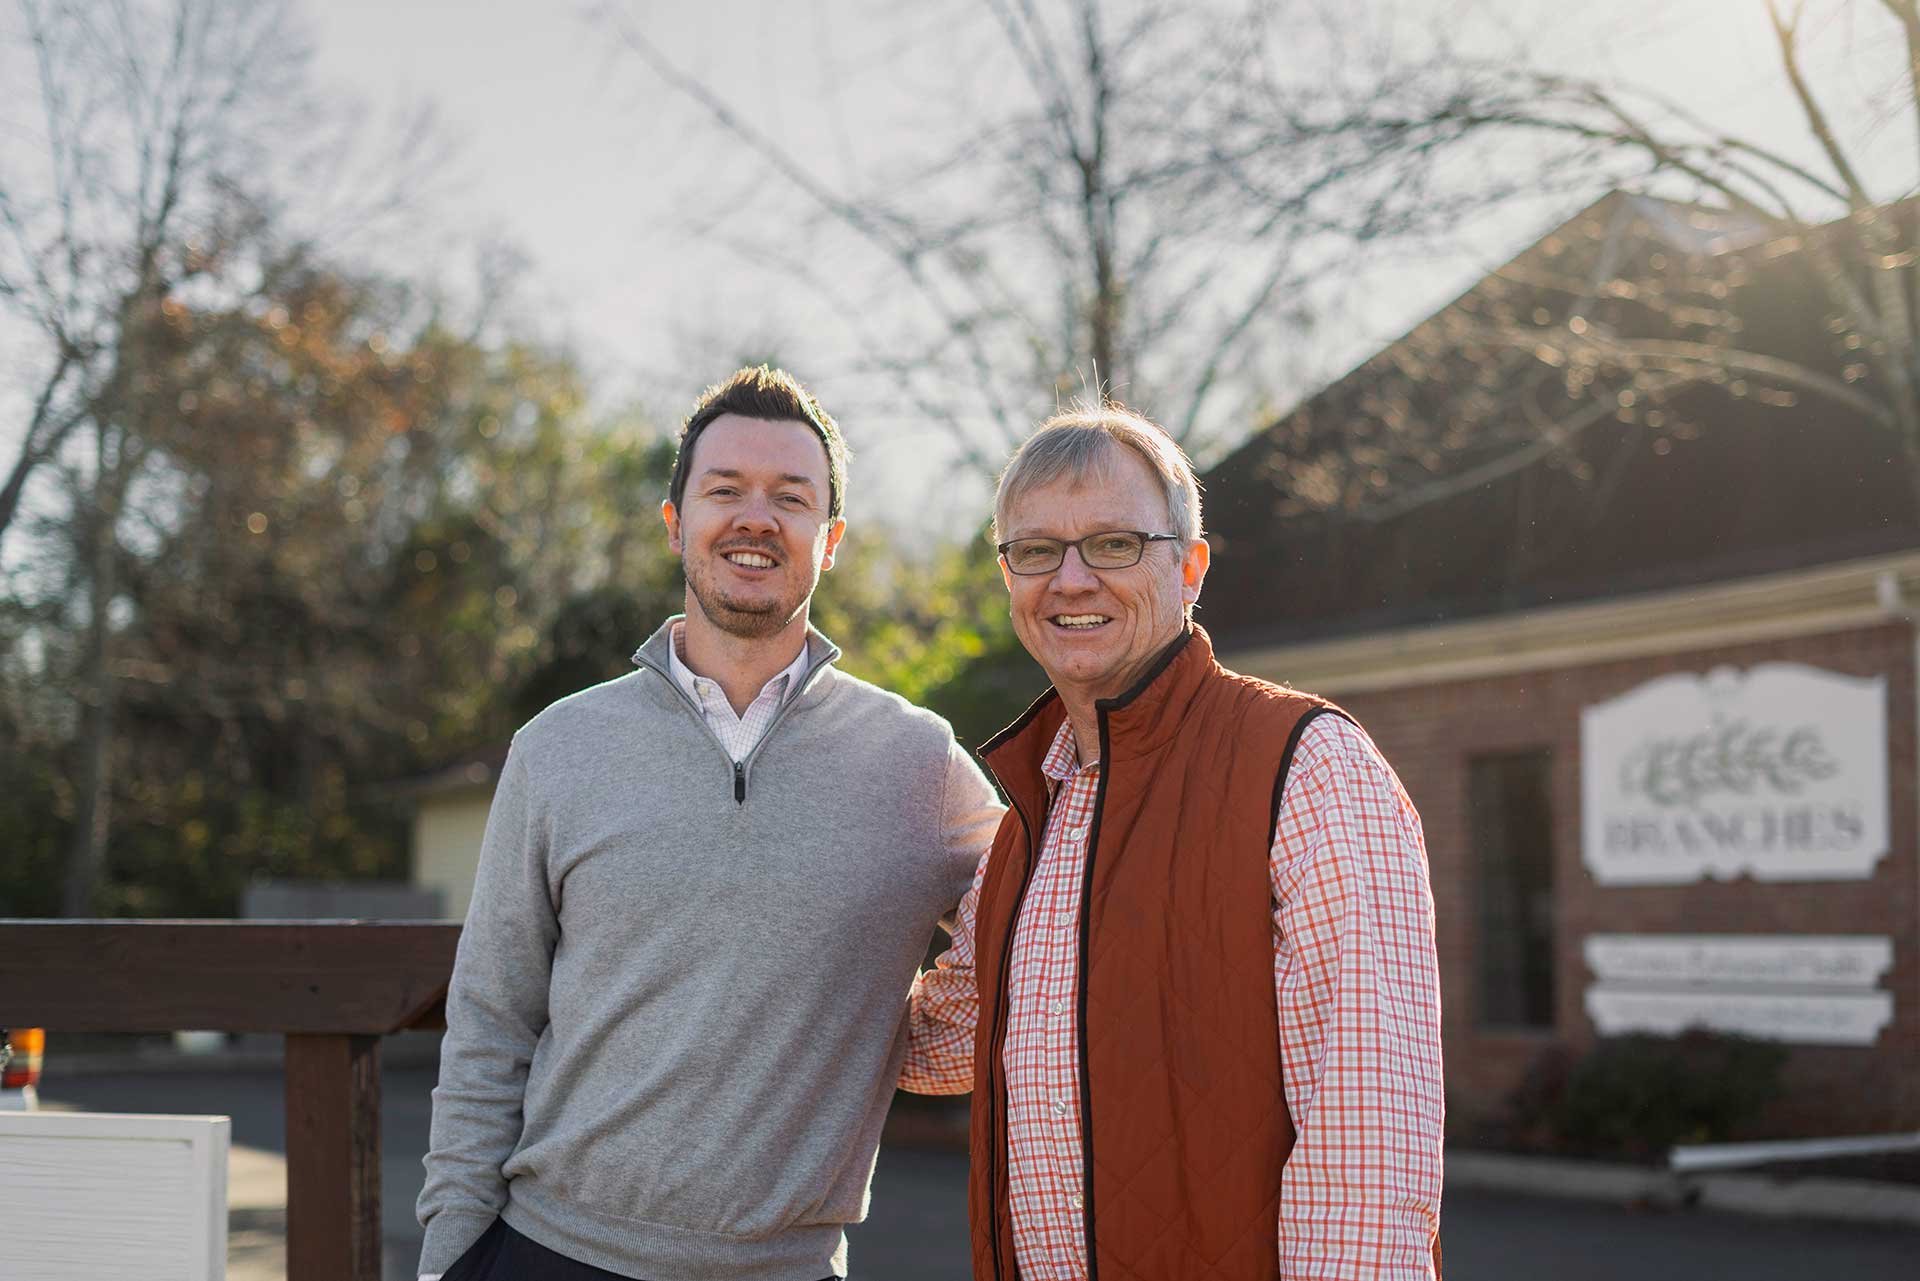 Mike and Josh Courtney pose in front of their counseling center.